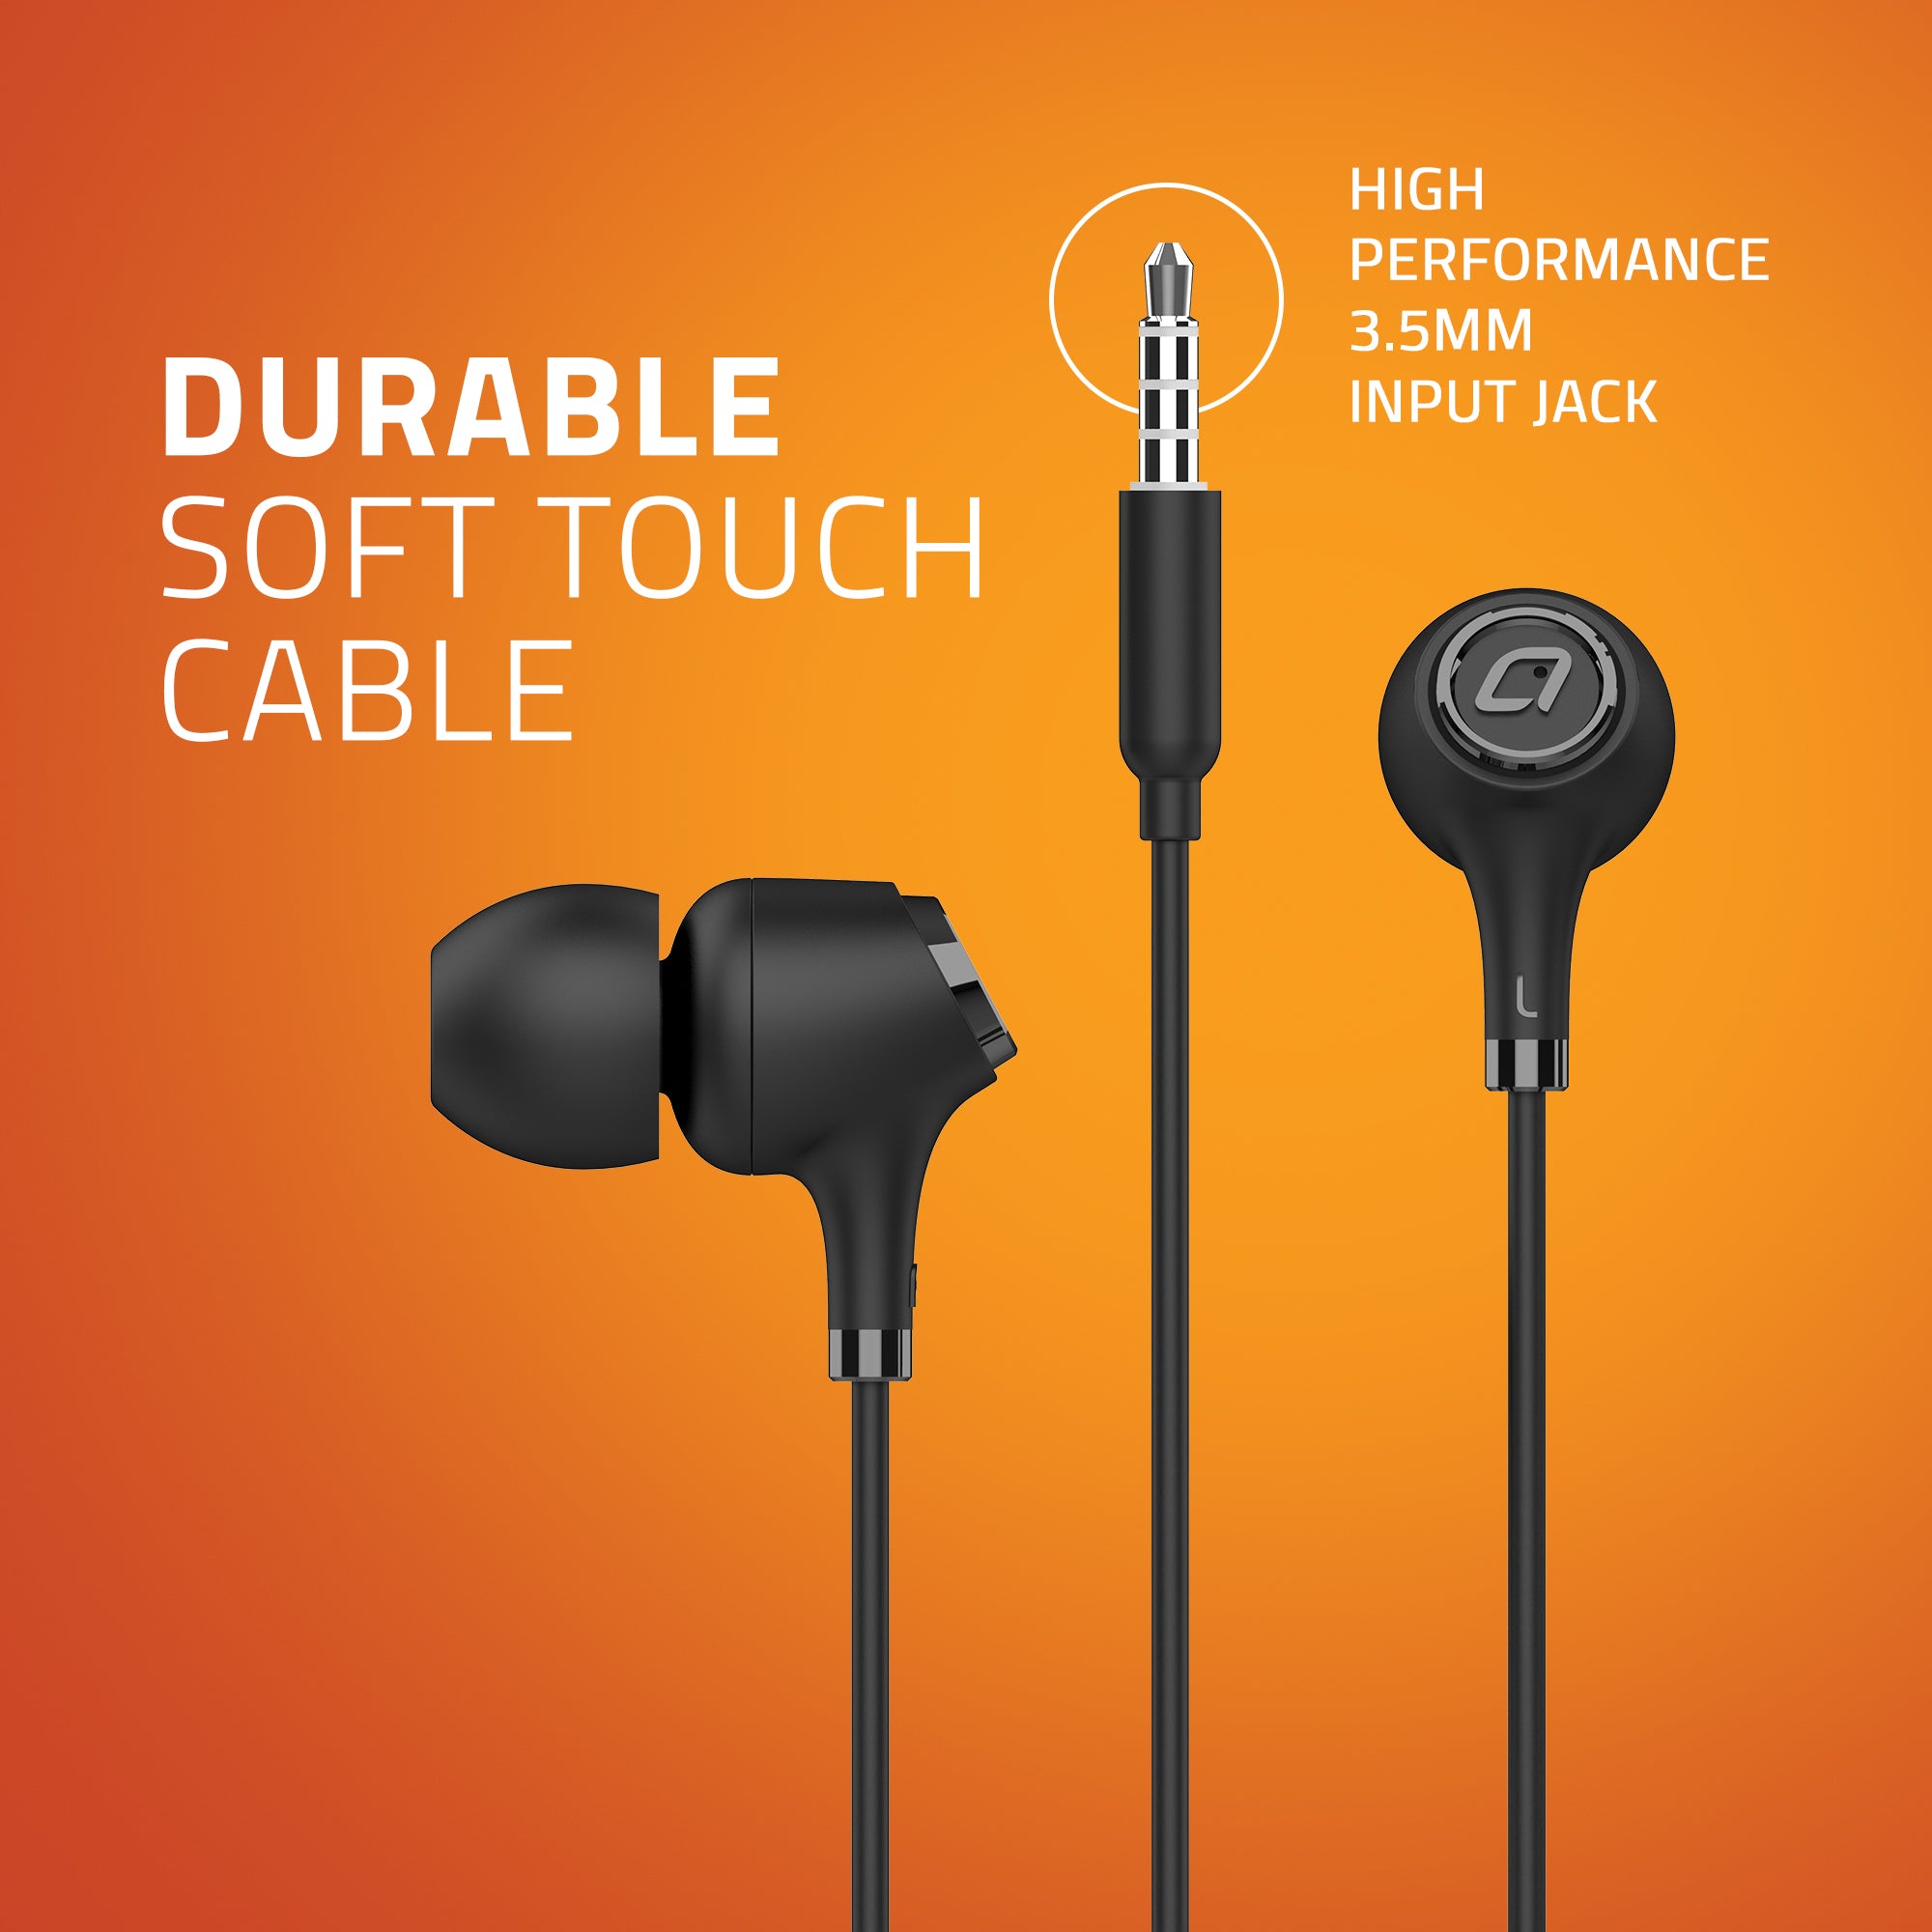 E500M Artis Wired Earphones - Durable Soft touch Cable